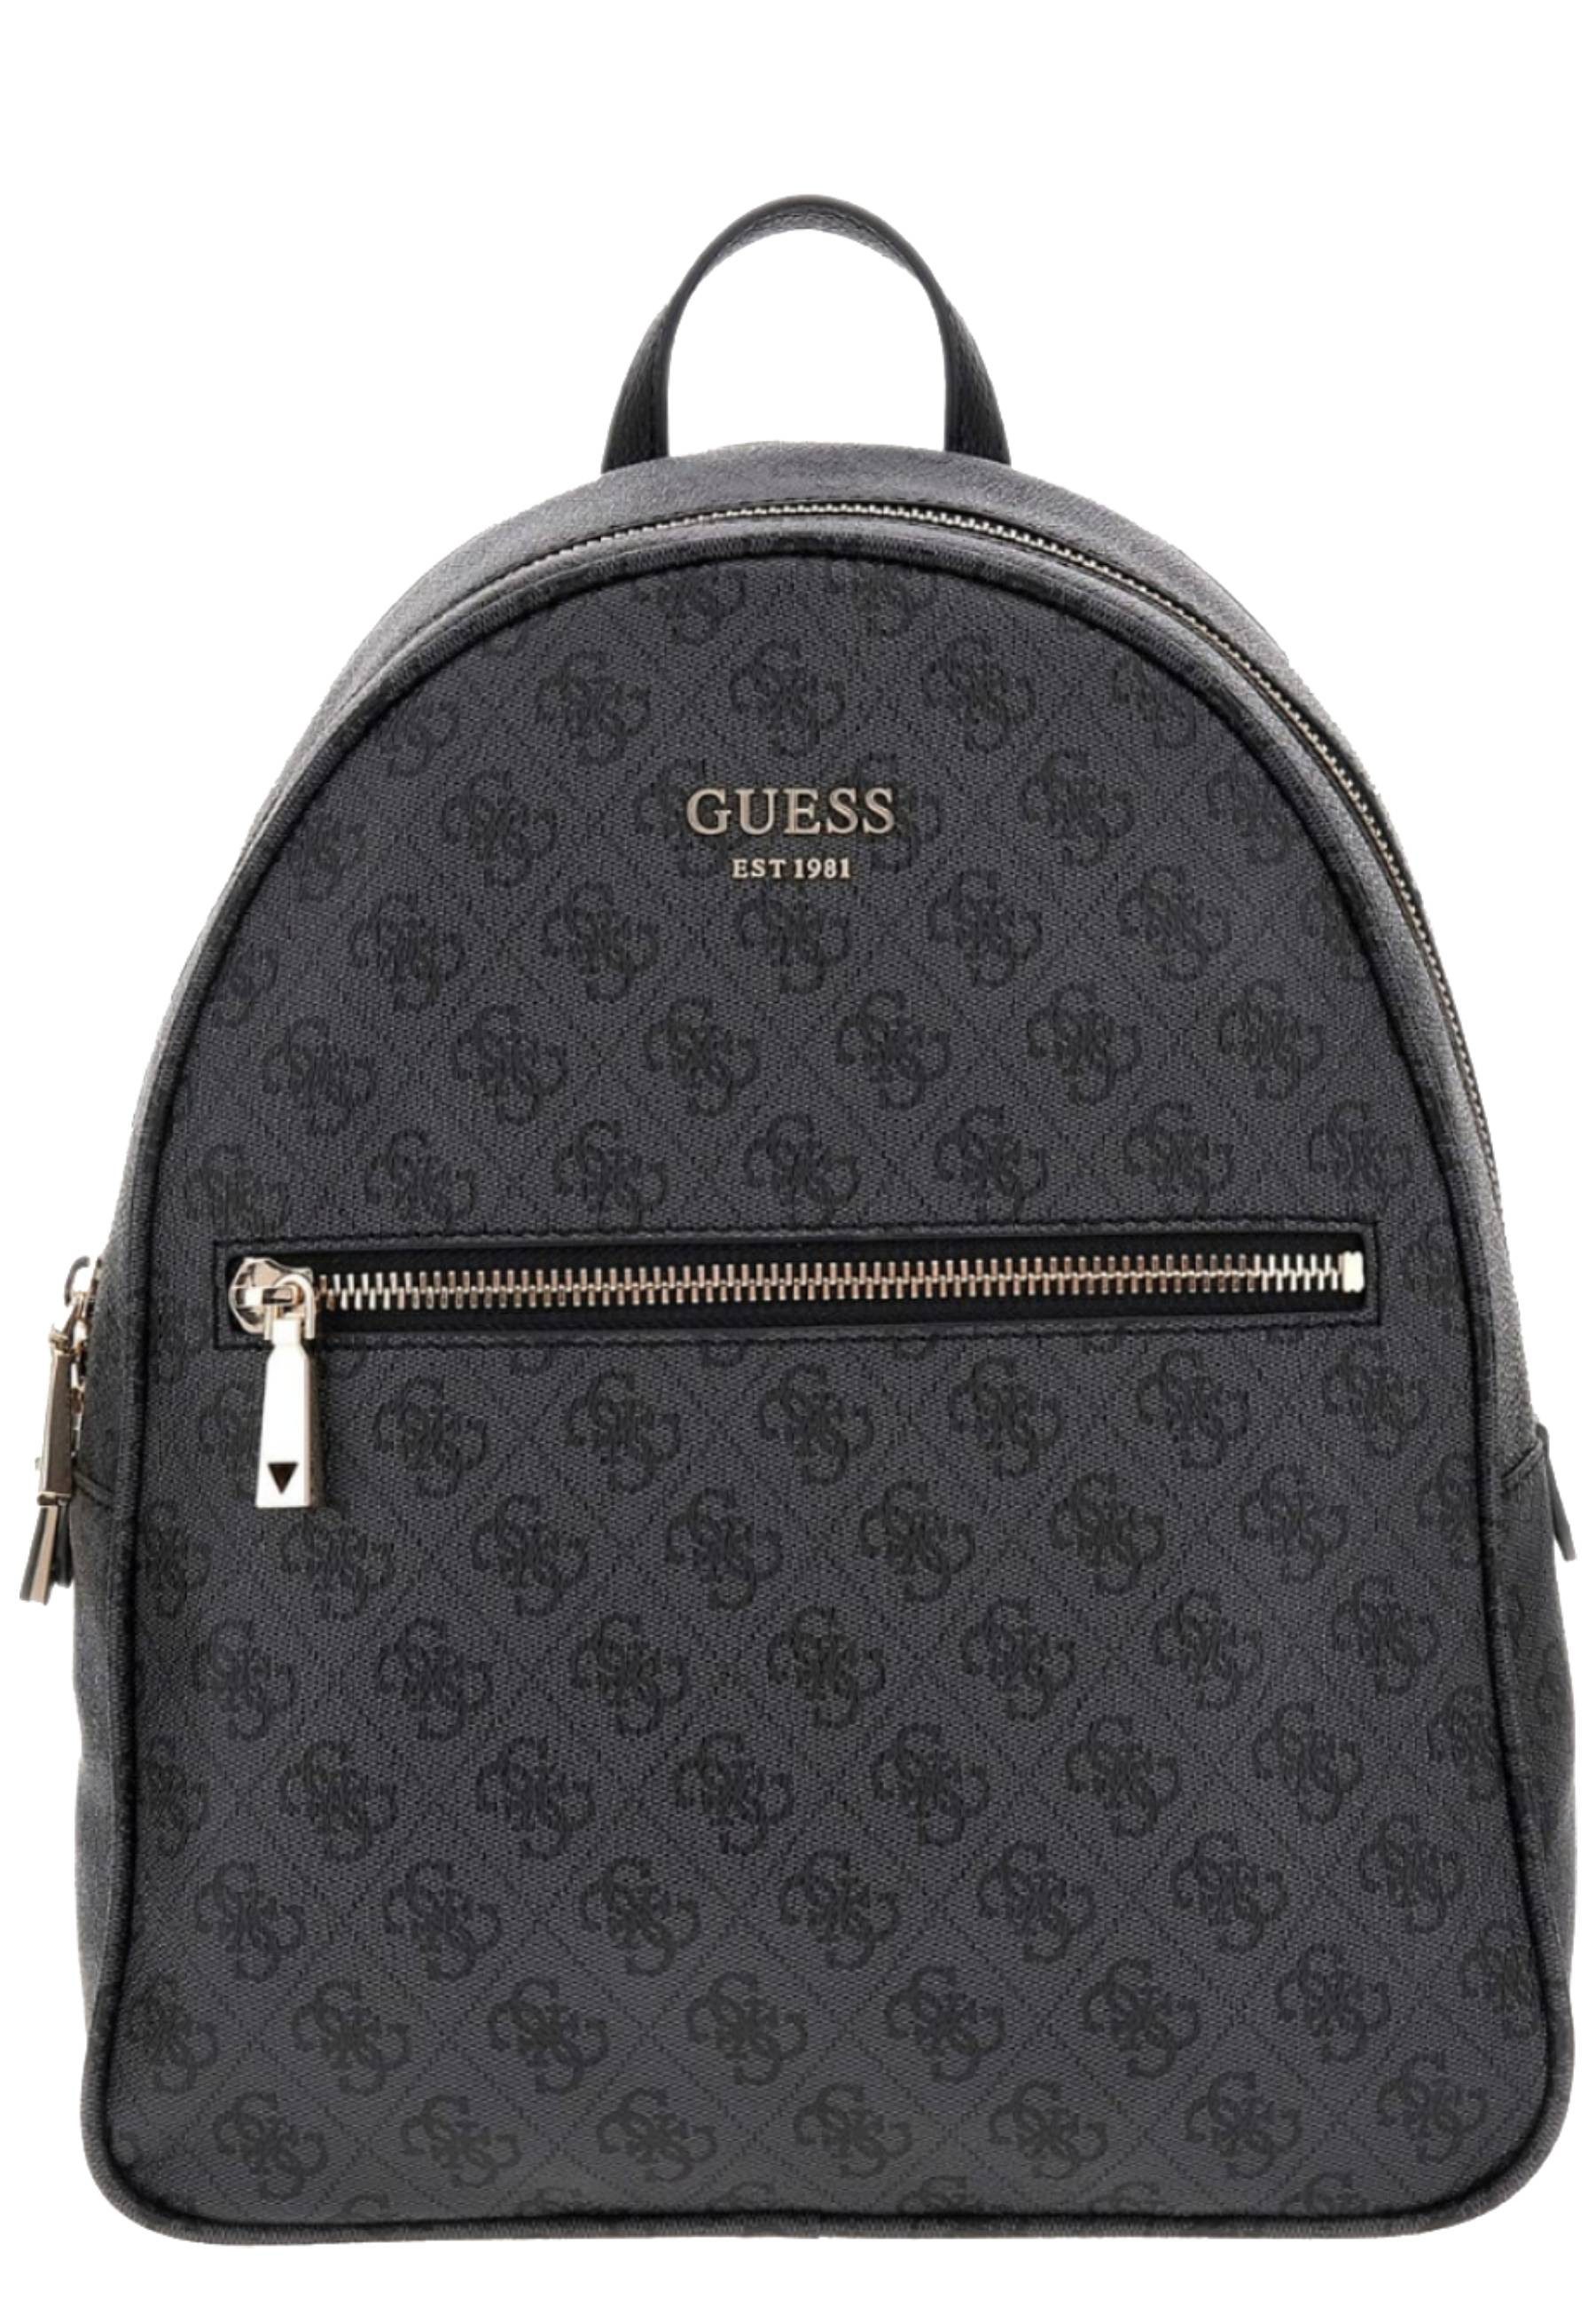 Guess Rucksack Vikky Backpack